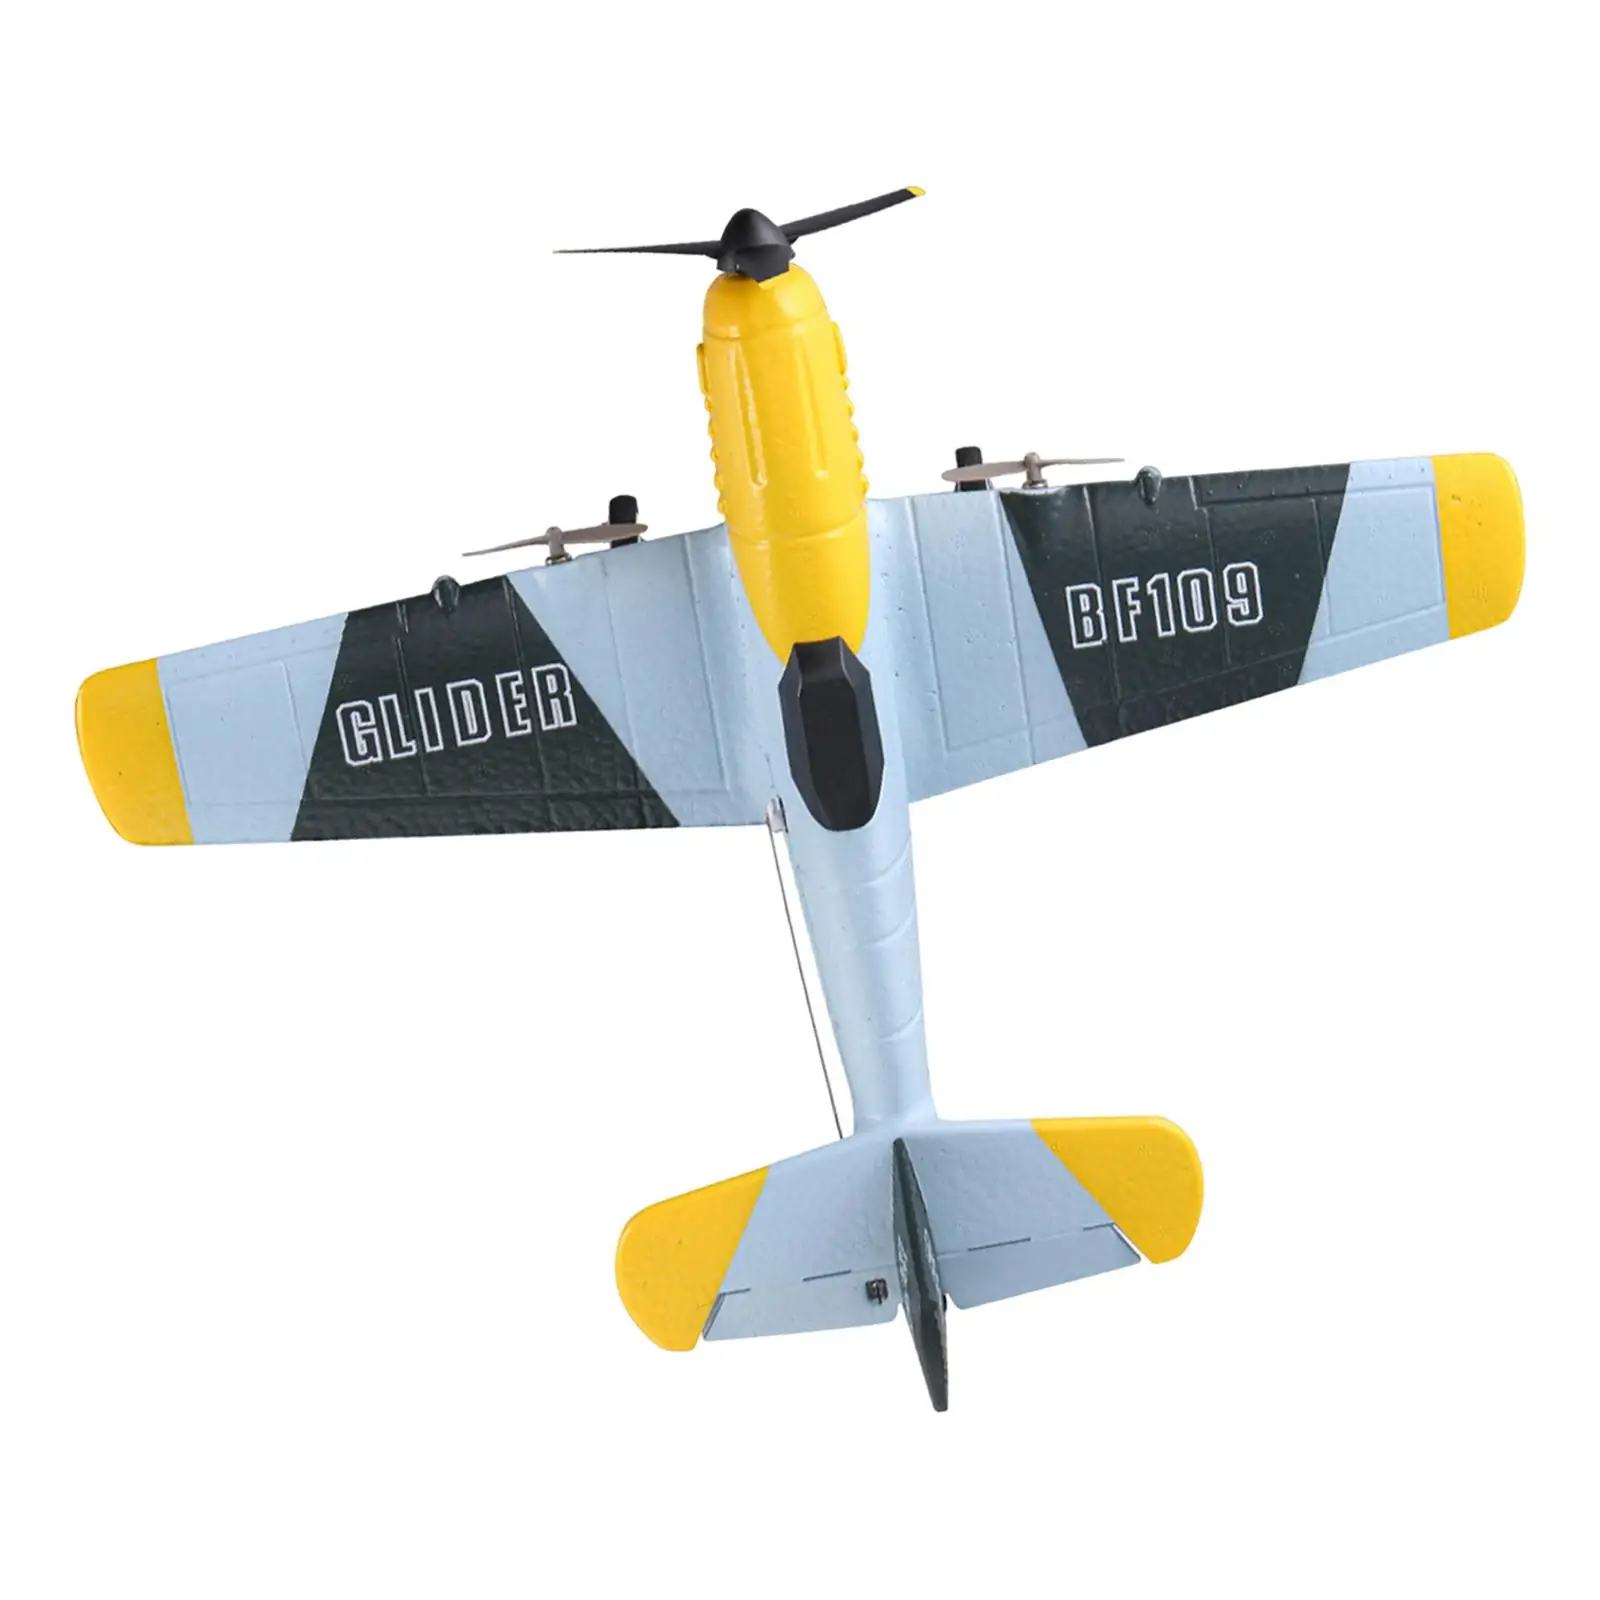 3 CH RC Easy to Contro 2.4G Remote Control Airplane Hobby RC Glider for Kids Beginner Adults Boys Girls